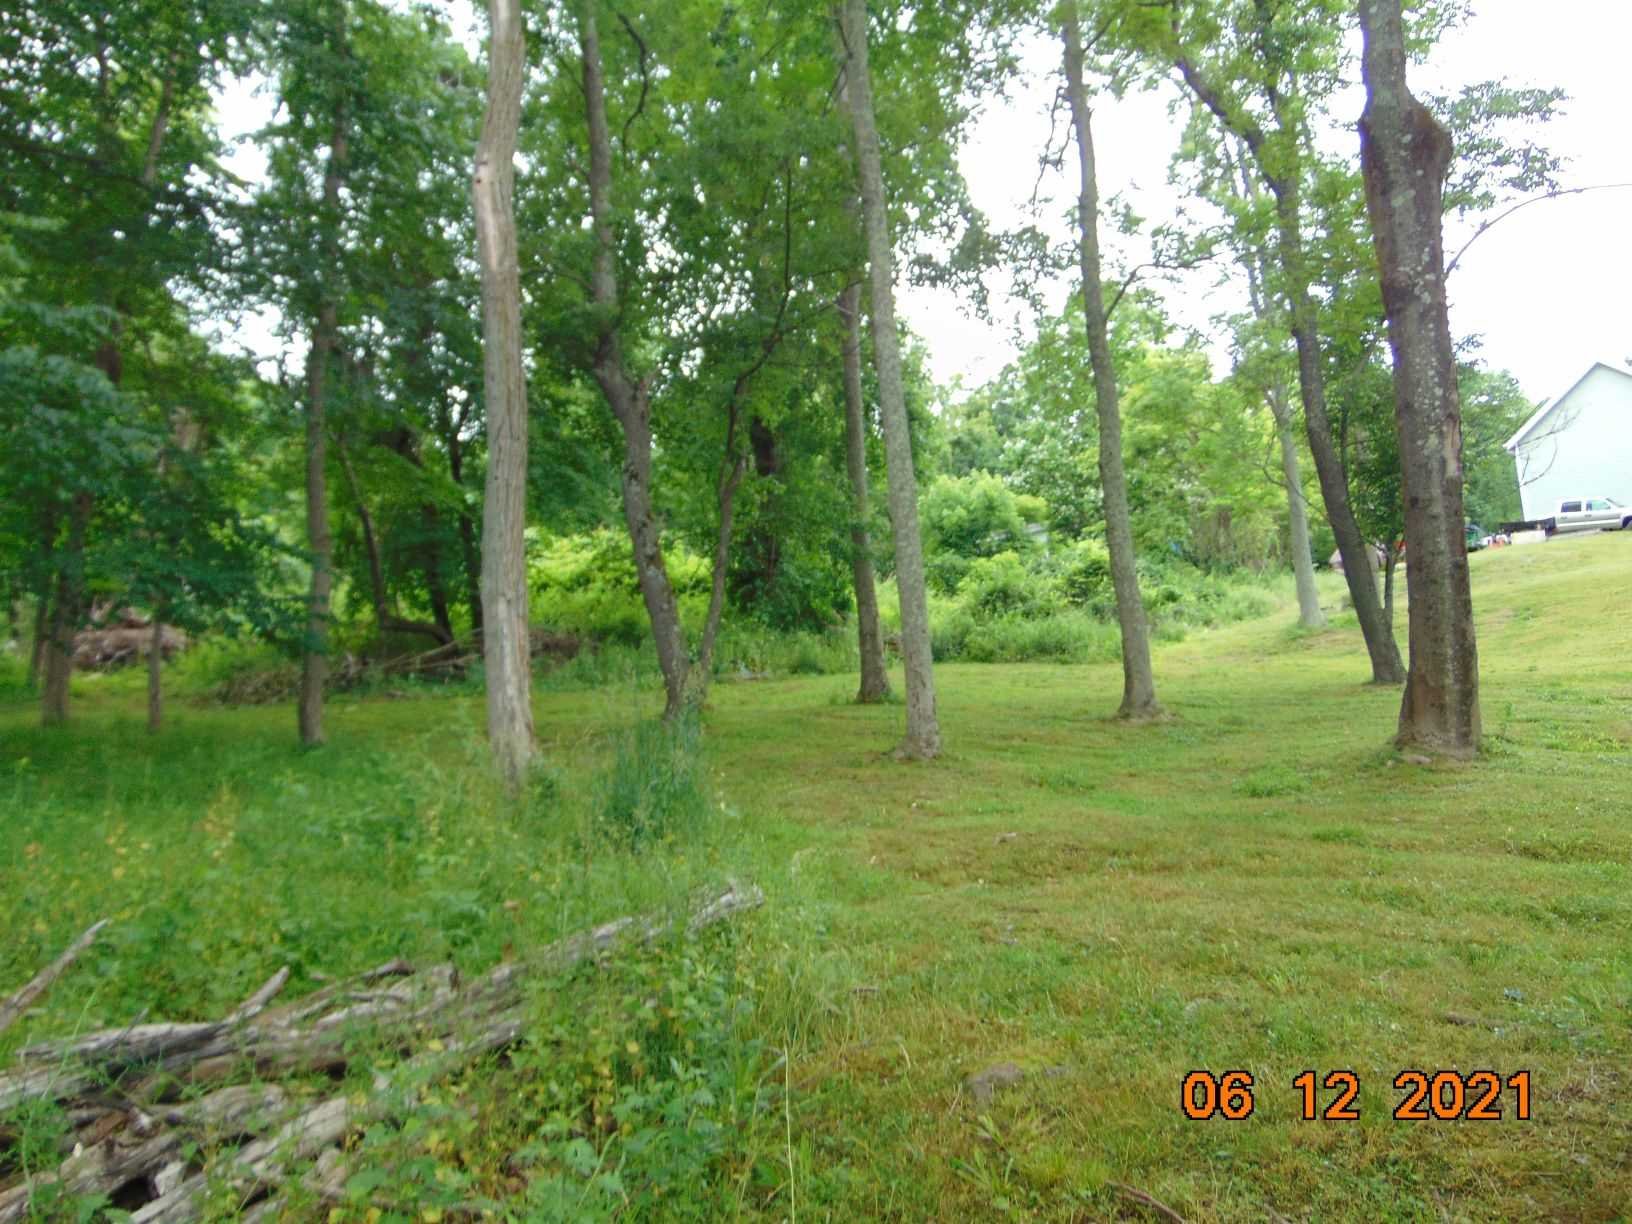 a view of yard with trees